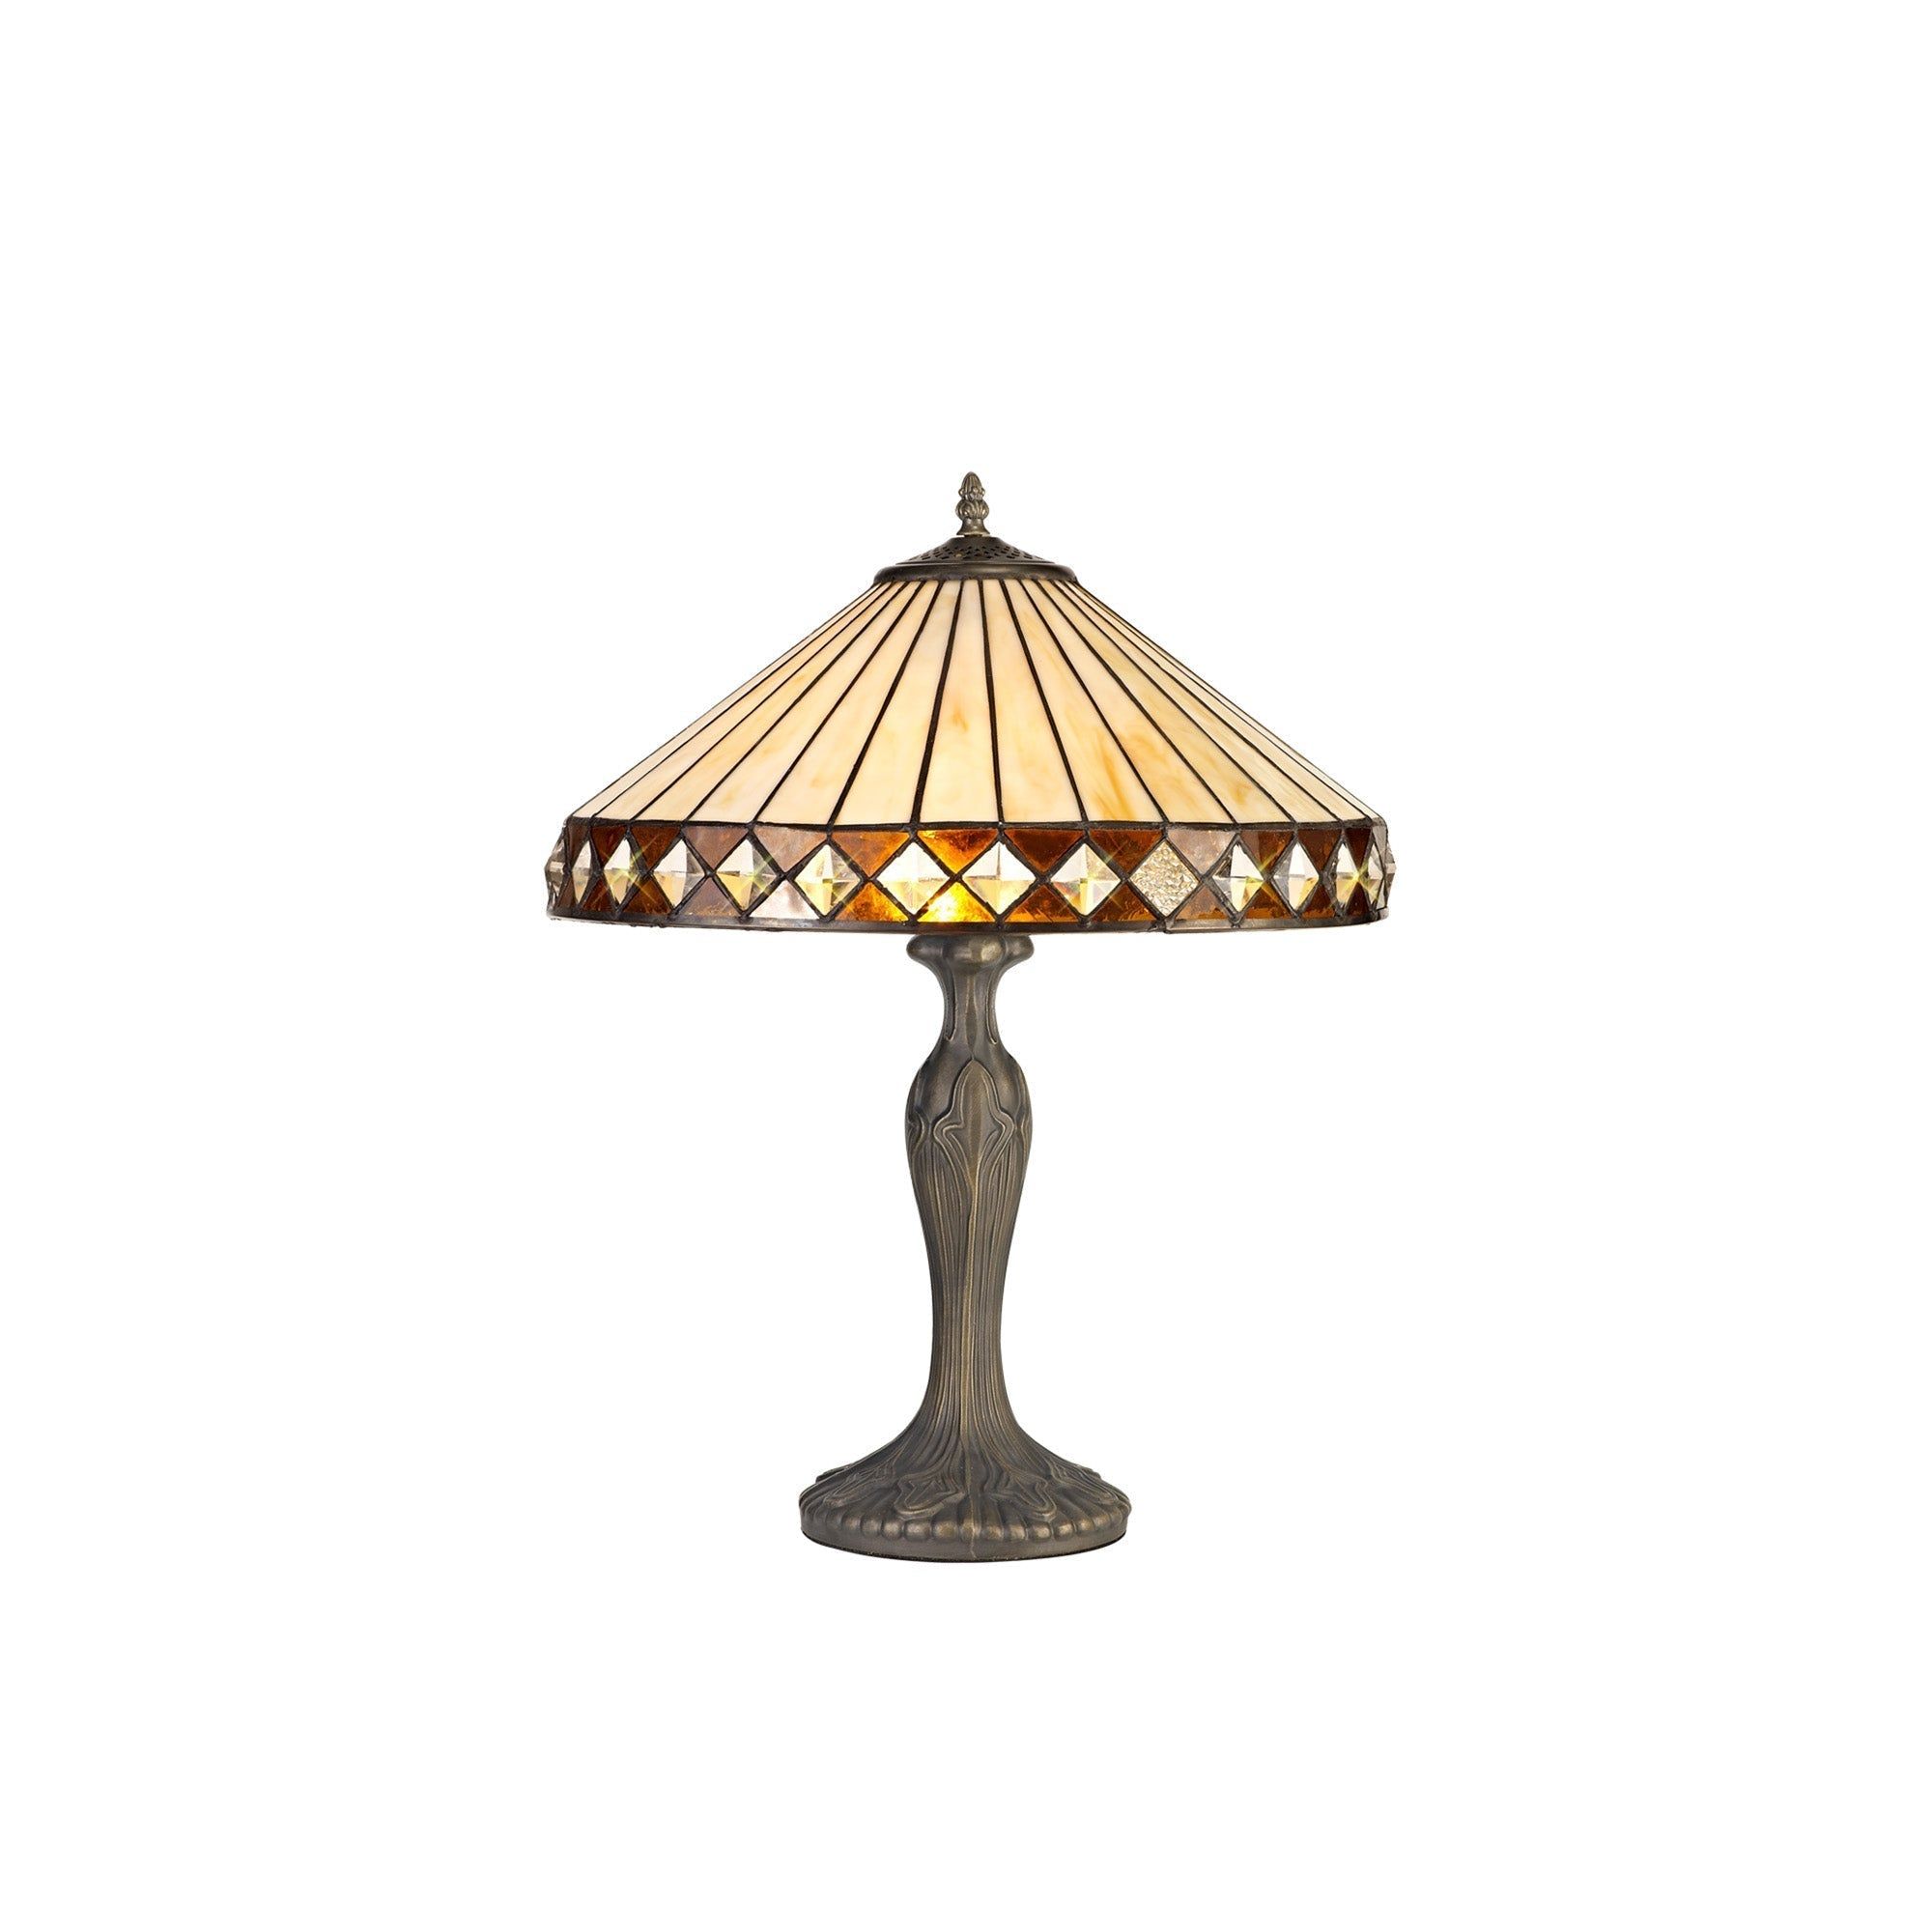 Isrmian 1 Light Curved Table Lamp E27 With 30cm Tiffany Shade, Amber/Cream/Crystal/Aged Antique Brass